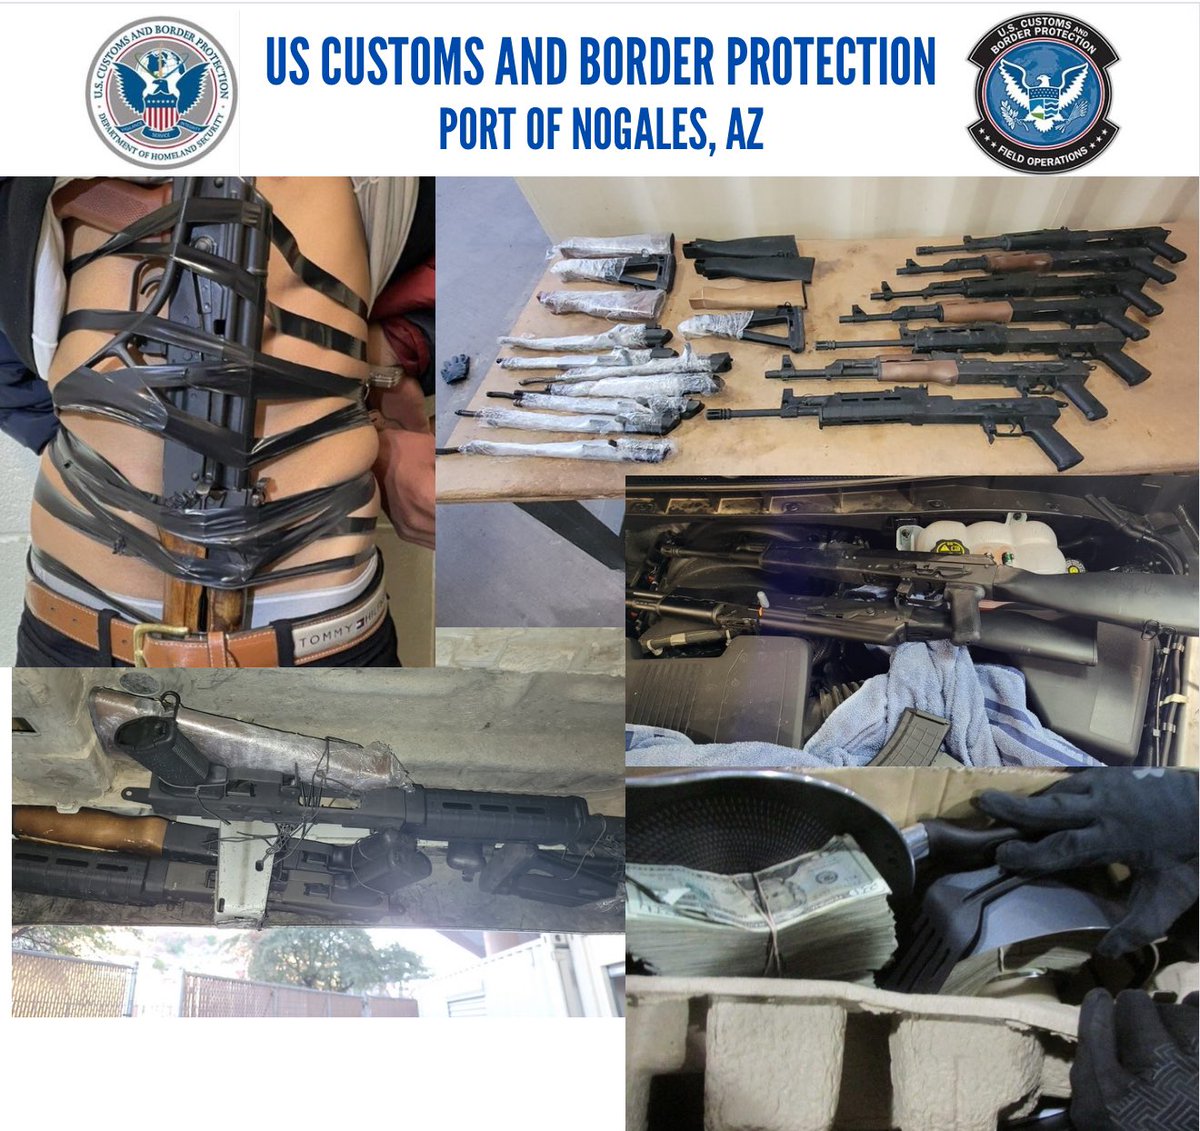 2/19-3/29: In 10 events, CBP officers working outbound operations seized 13 AK style weapons, 4 pistols and over $50,000 in cash destined to Mexico to support Transnational Criminal Organizations. Concealment methods included strapped to torso, undercarriage, and in cookware.